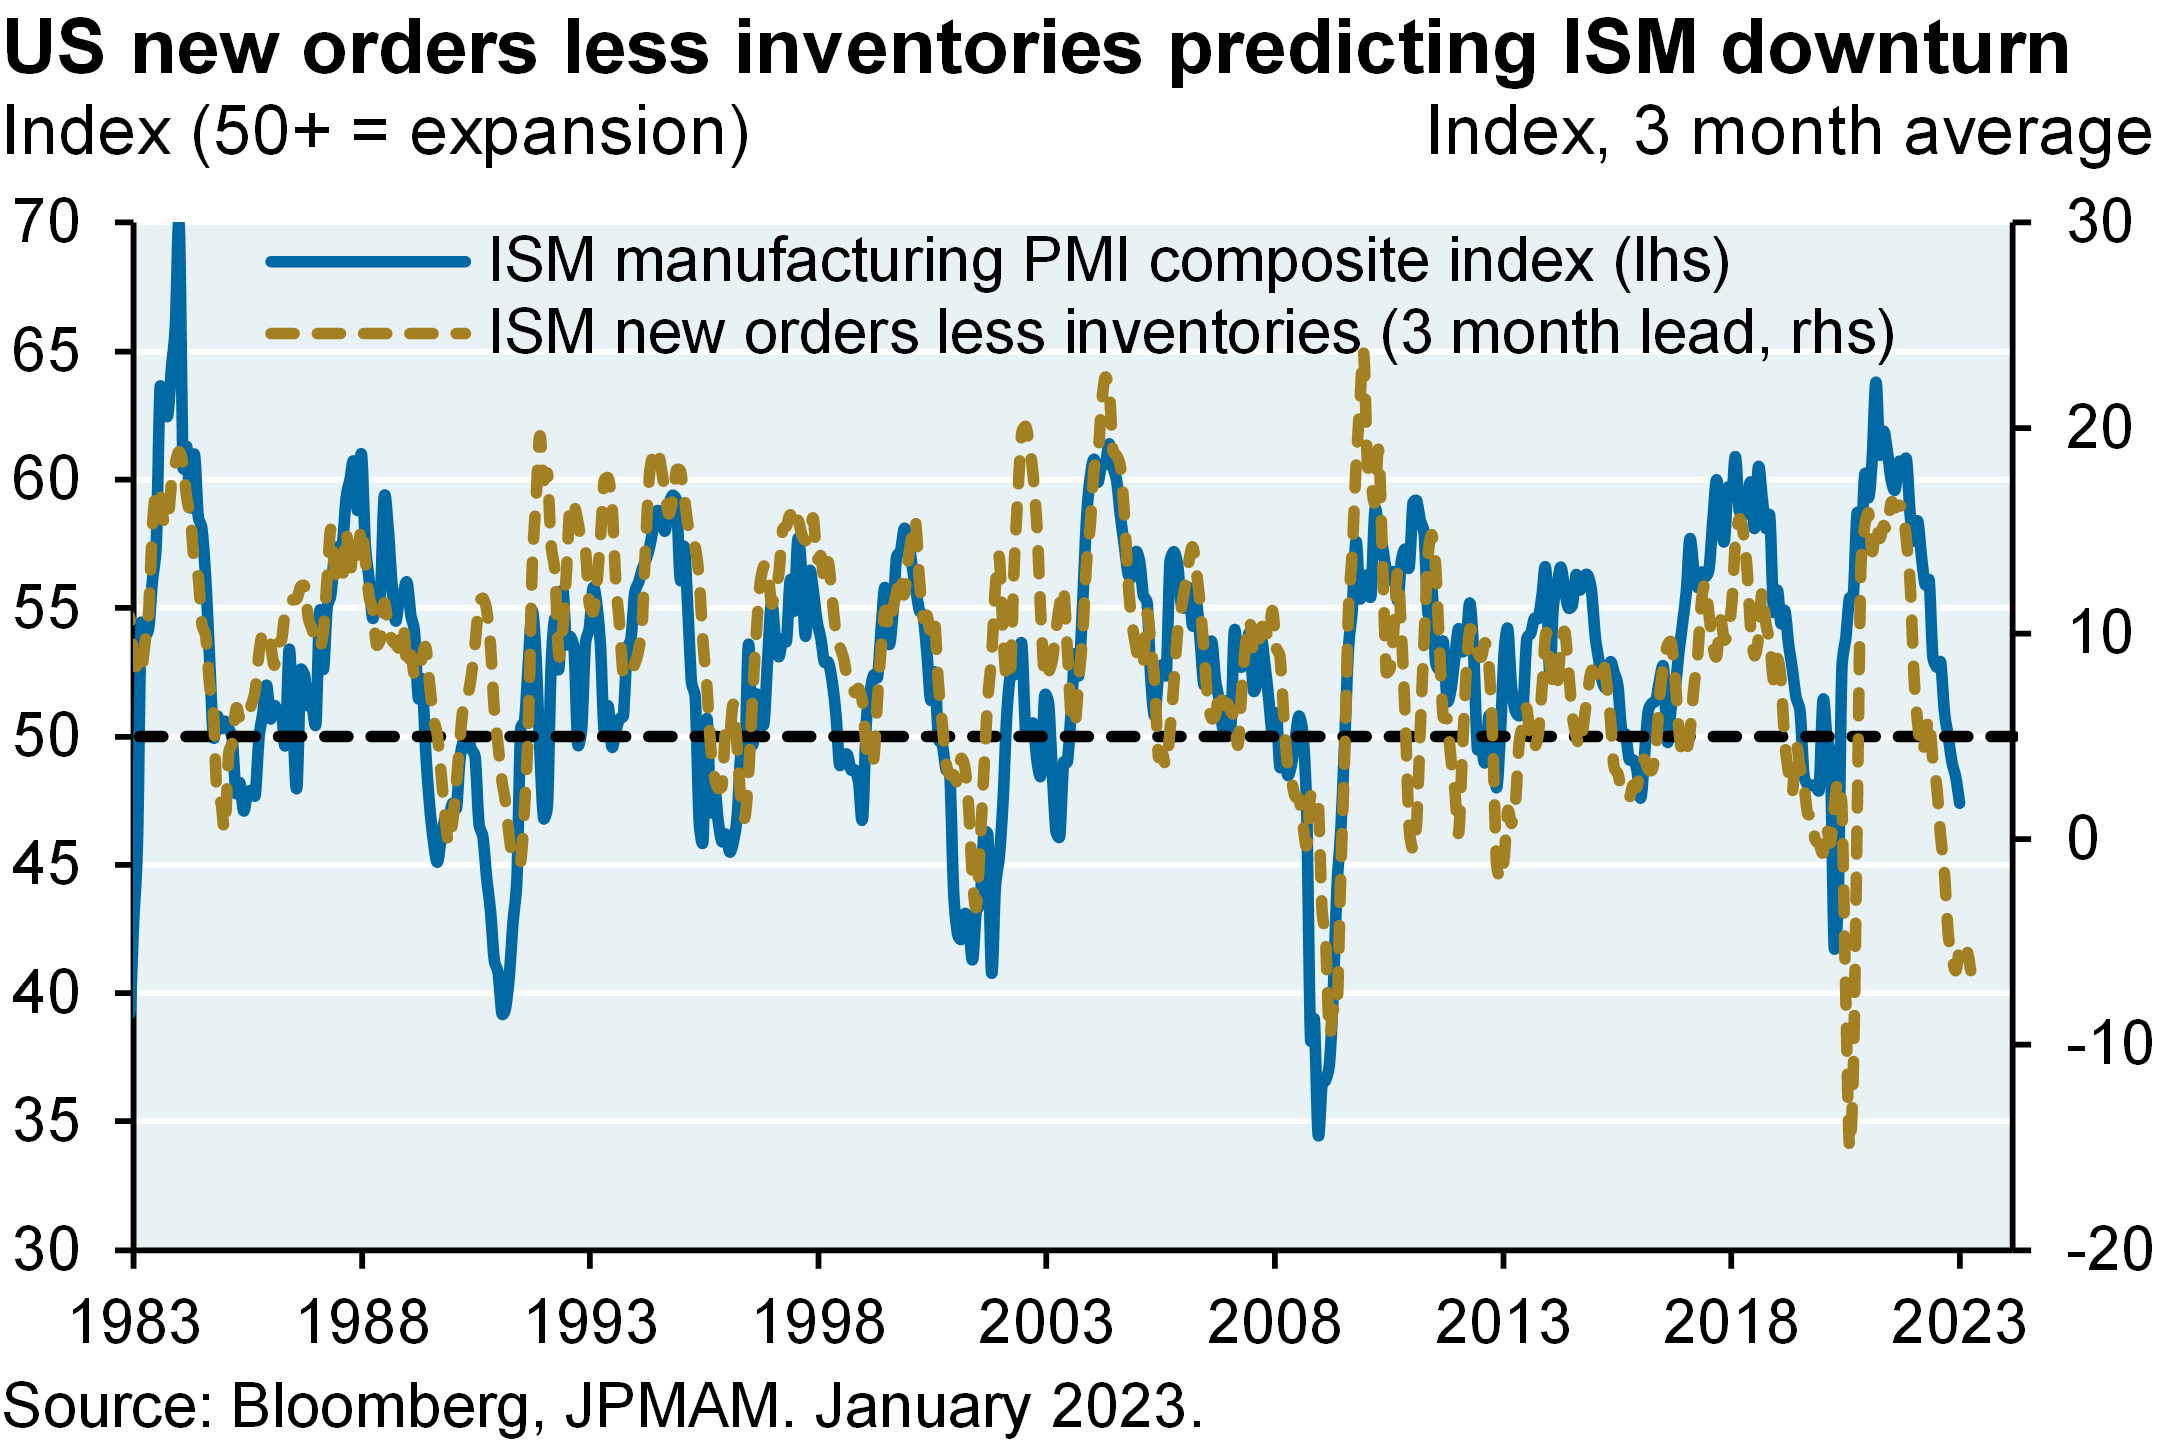 Line chart compares the ISM manufacturing composite to ISM new orders less inventories (3 month lead) since 1983. The chart conveys strong correlation between both series, while ISM new orders less inventories predict the ISM composite will reach ~40 in the coming months ahead.